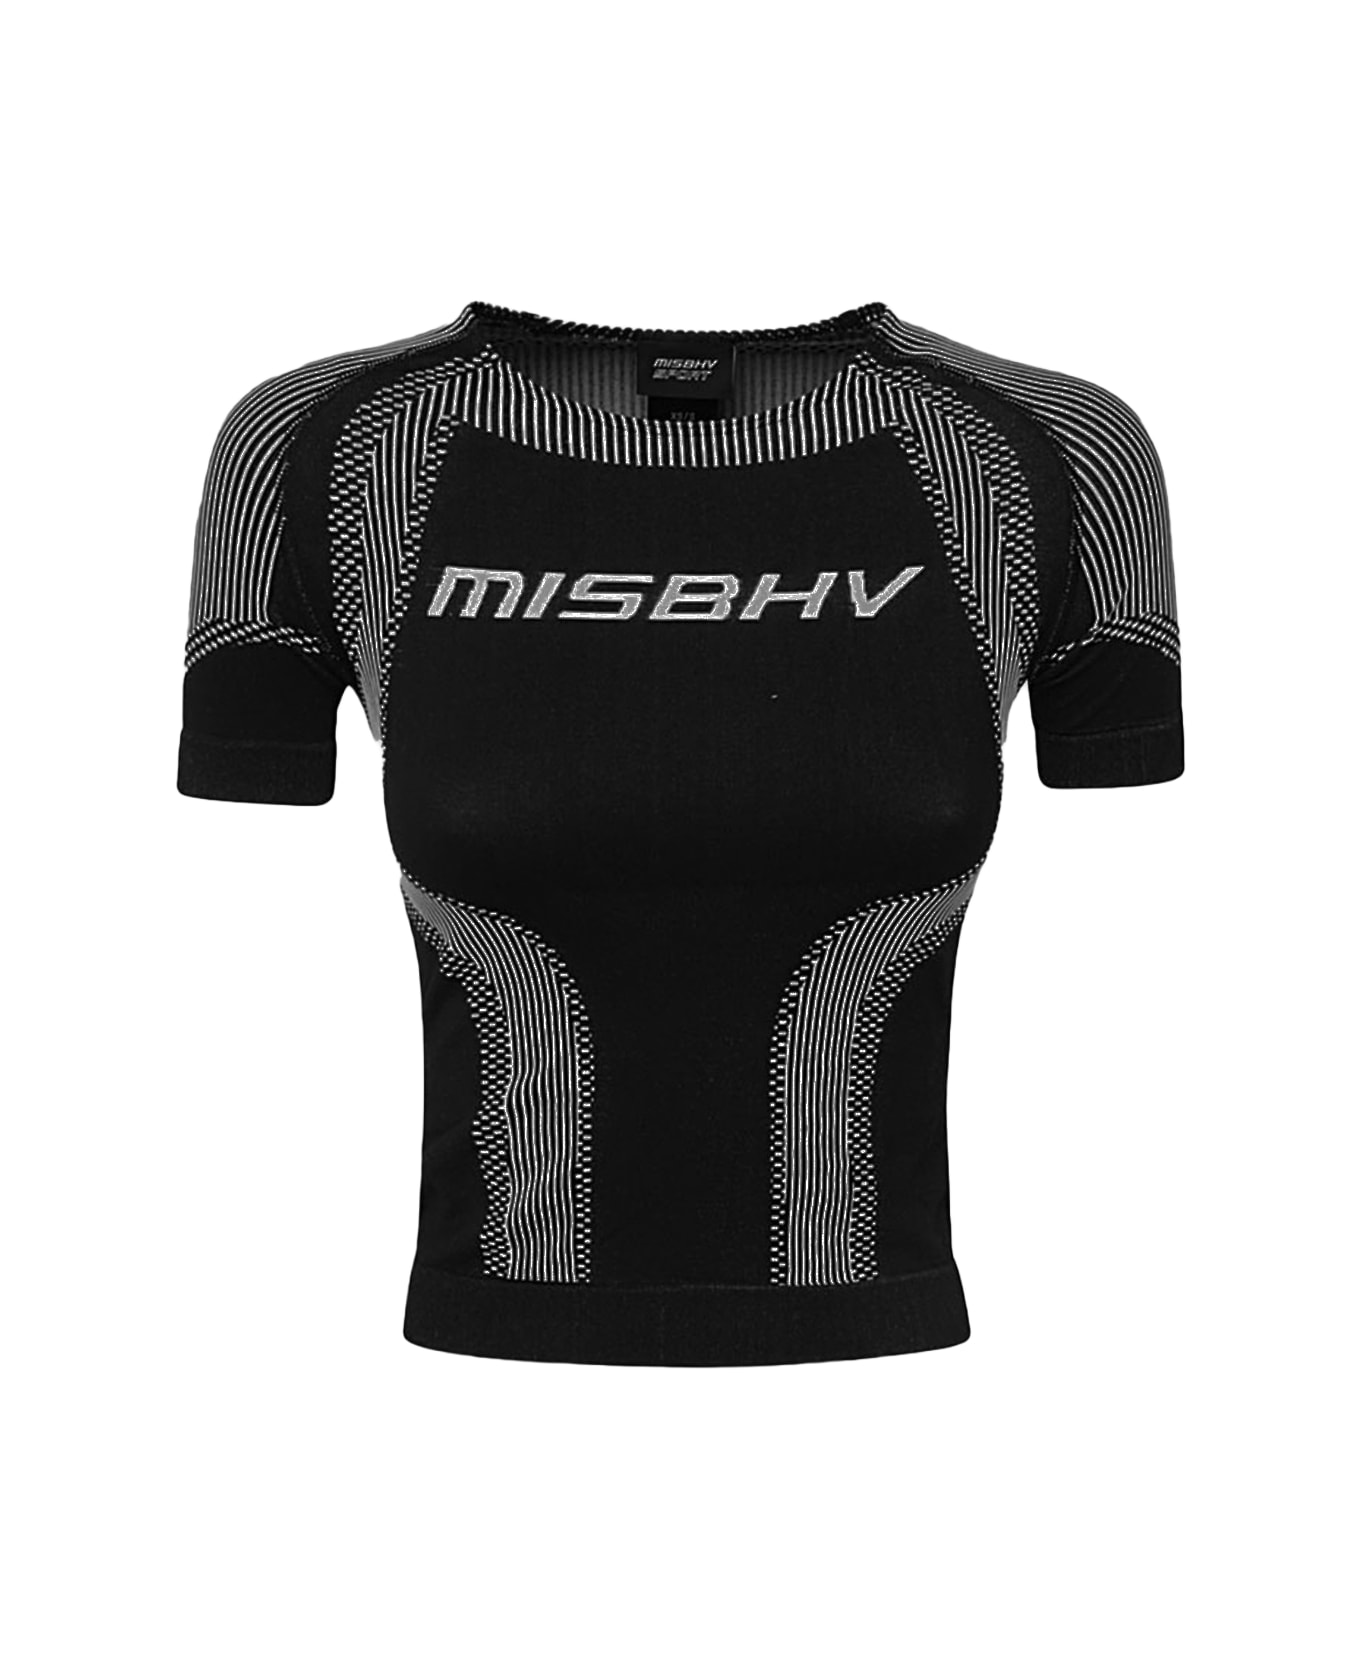 MISBHV Black And White Sport T-shirt - MUTED BLACK Tシャツ